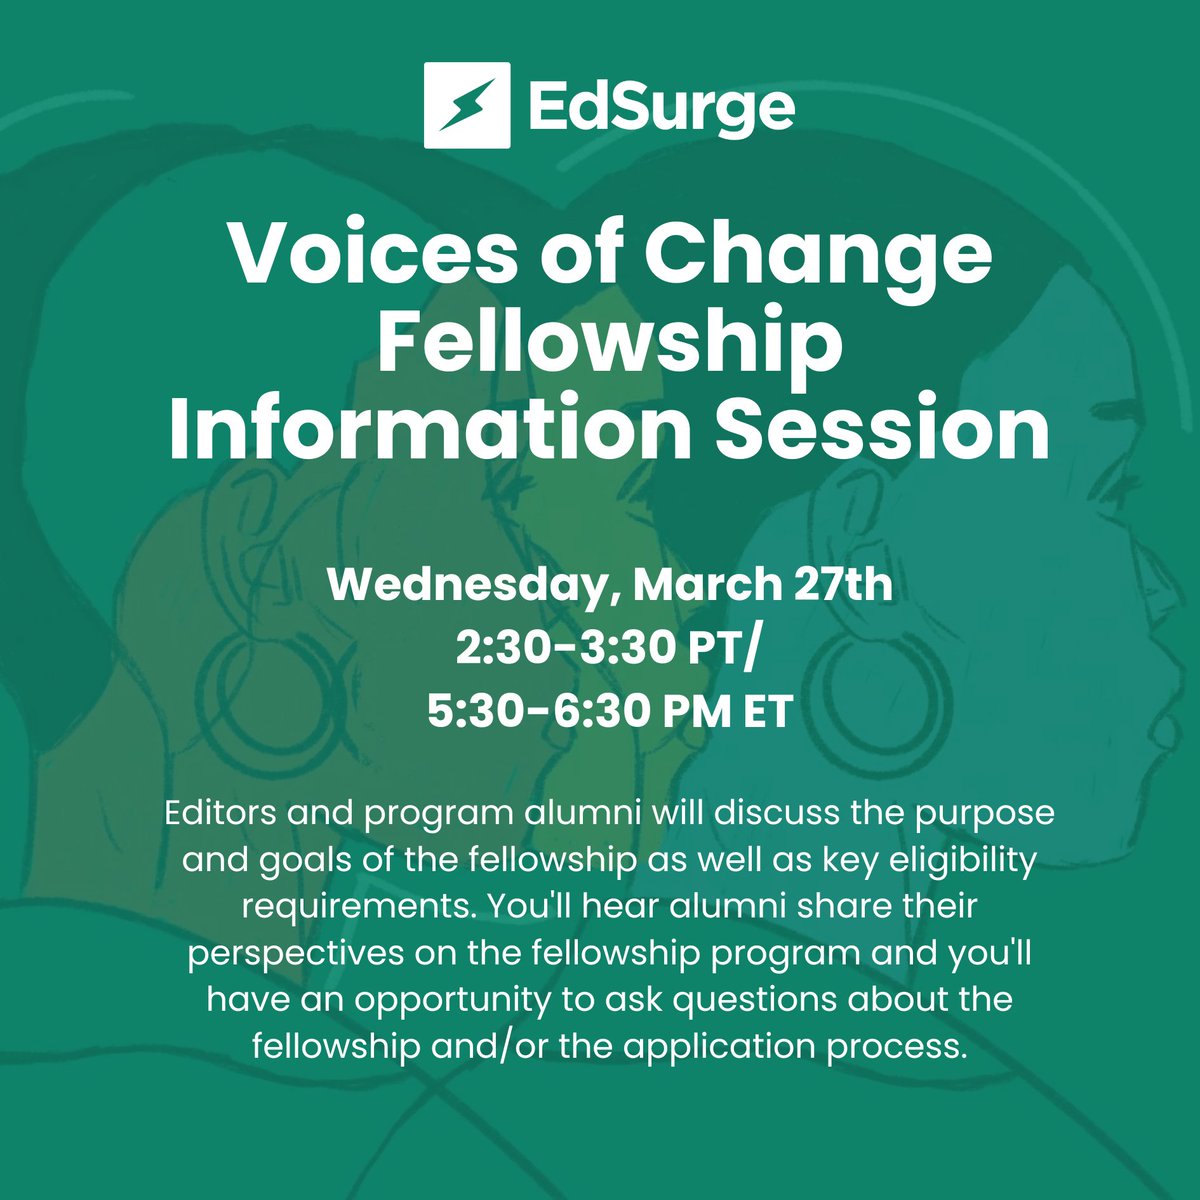 📢 Don't miss our Voices of Change Fellowship Info Session on March 27th, 4:30-5:30 PM CT! Learn about the fellowship, eligibility, and application process. 🗓️ Reserve your spot now! bit.ly/3wTUwAb